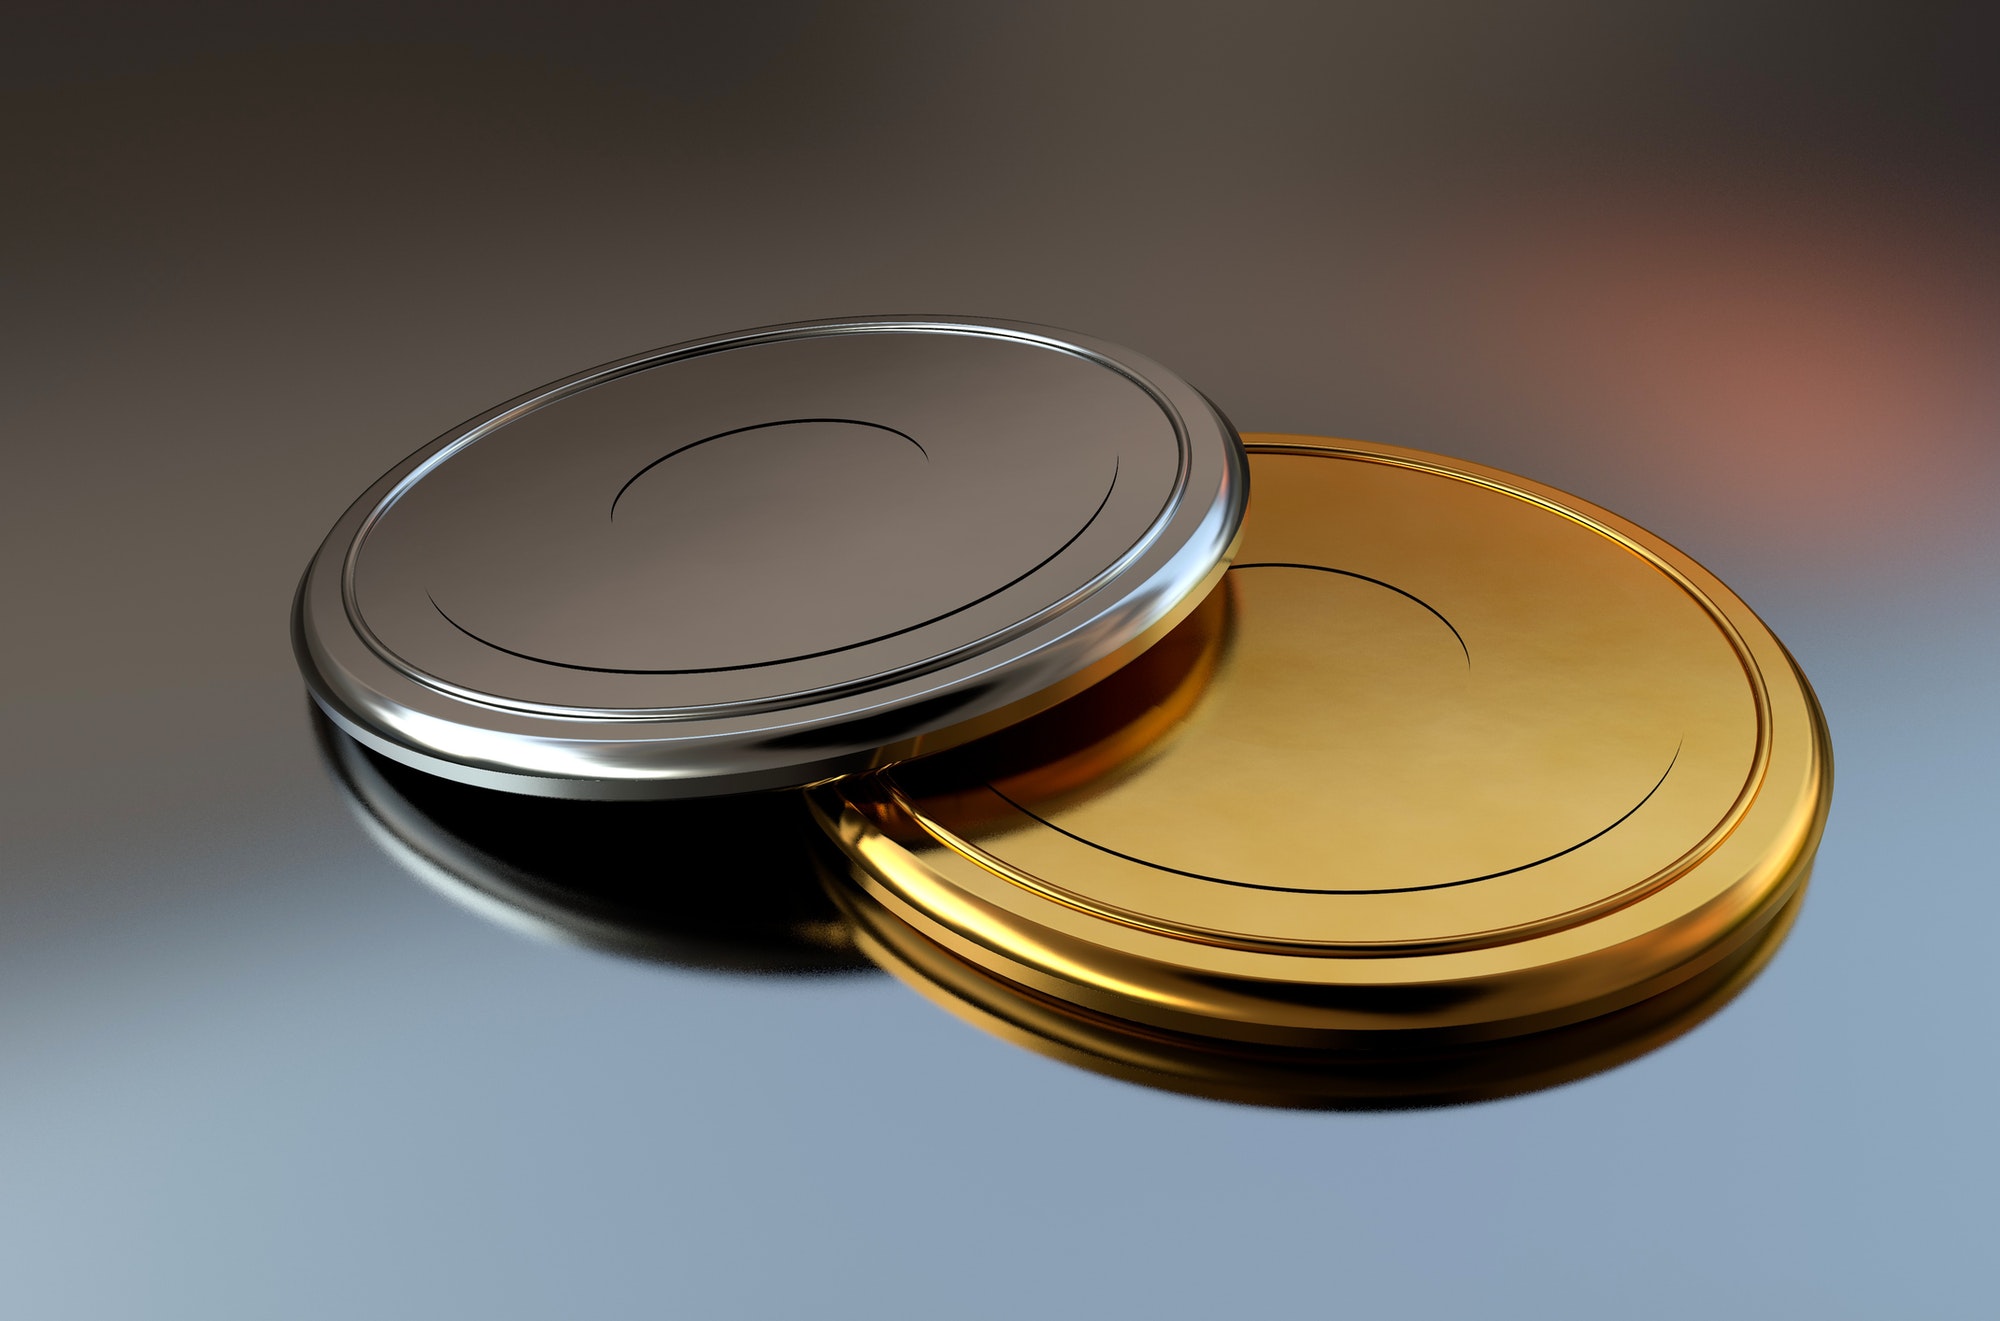 3D gold and silver medals or discs lying together on a mirror surface